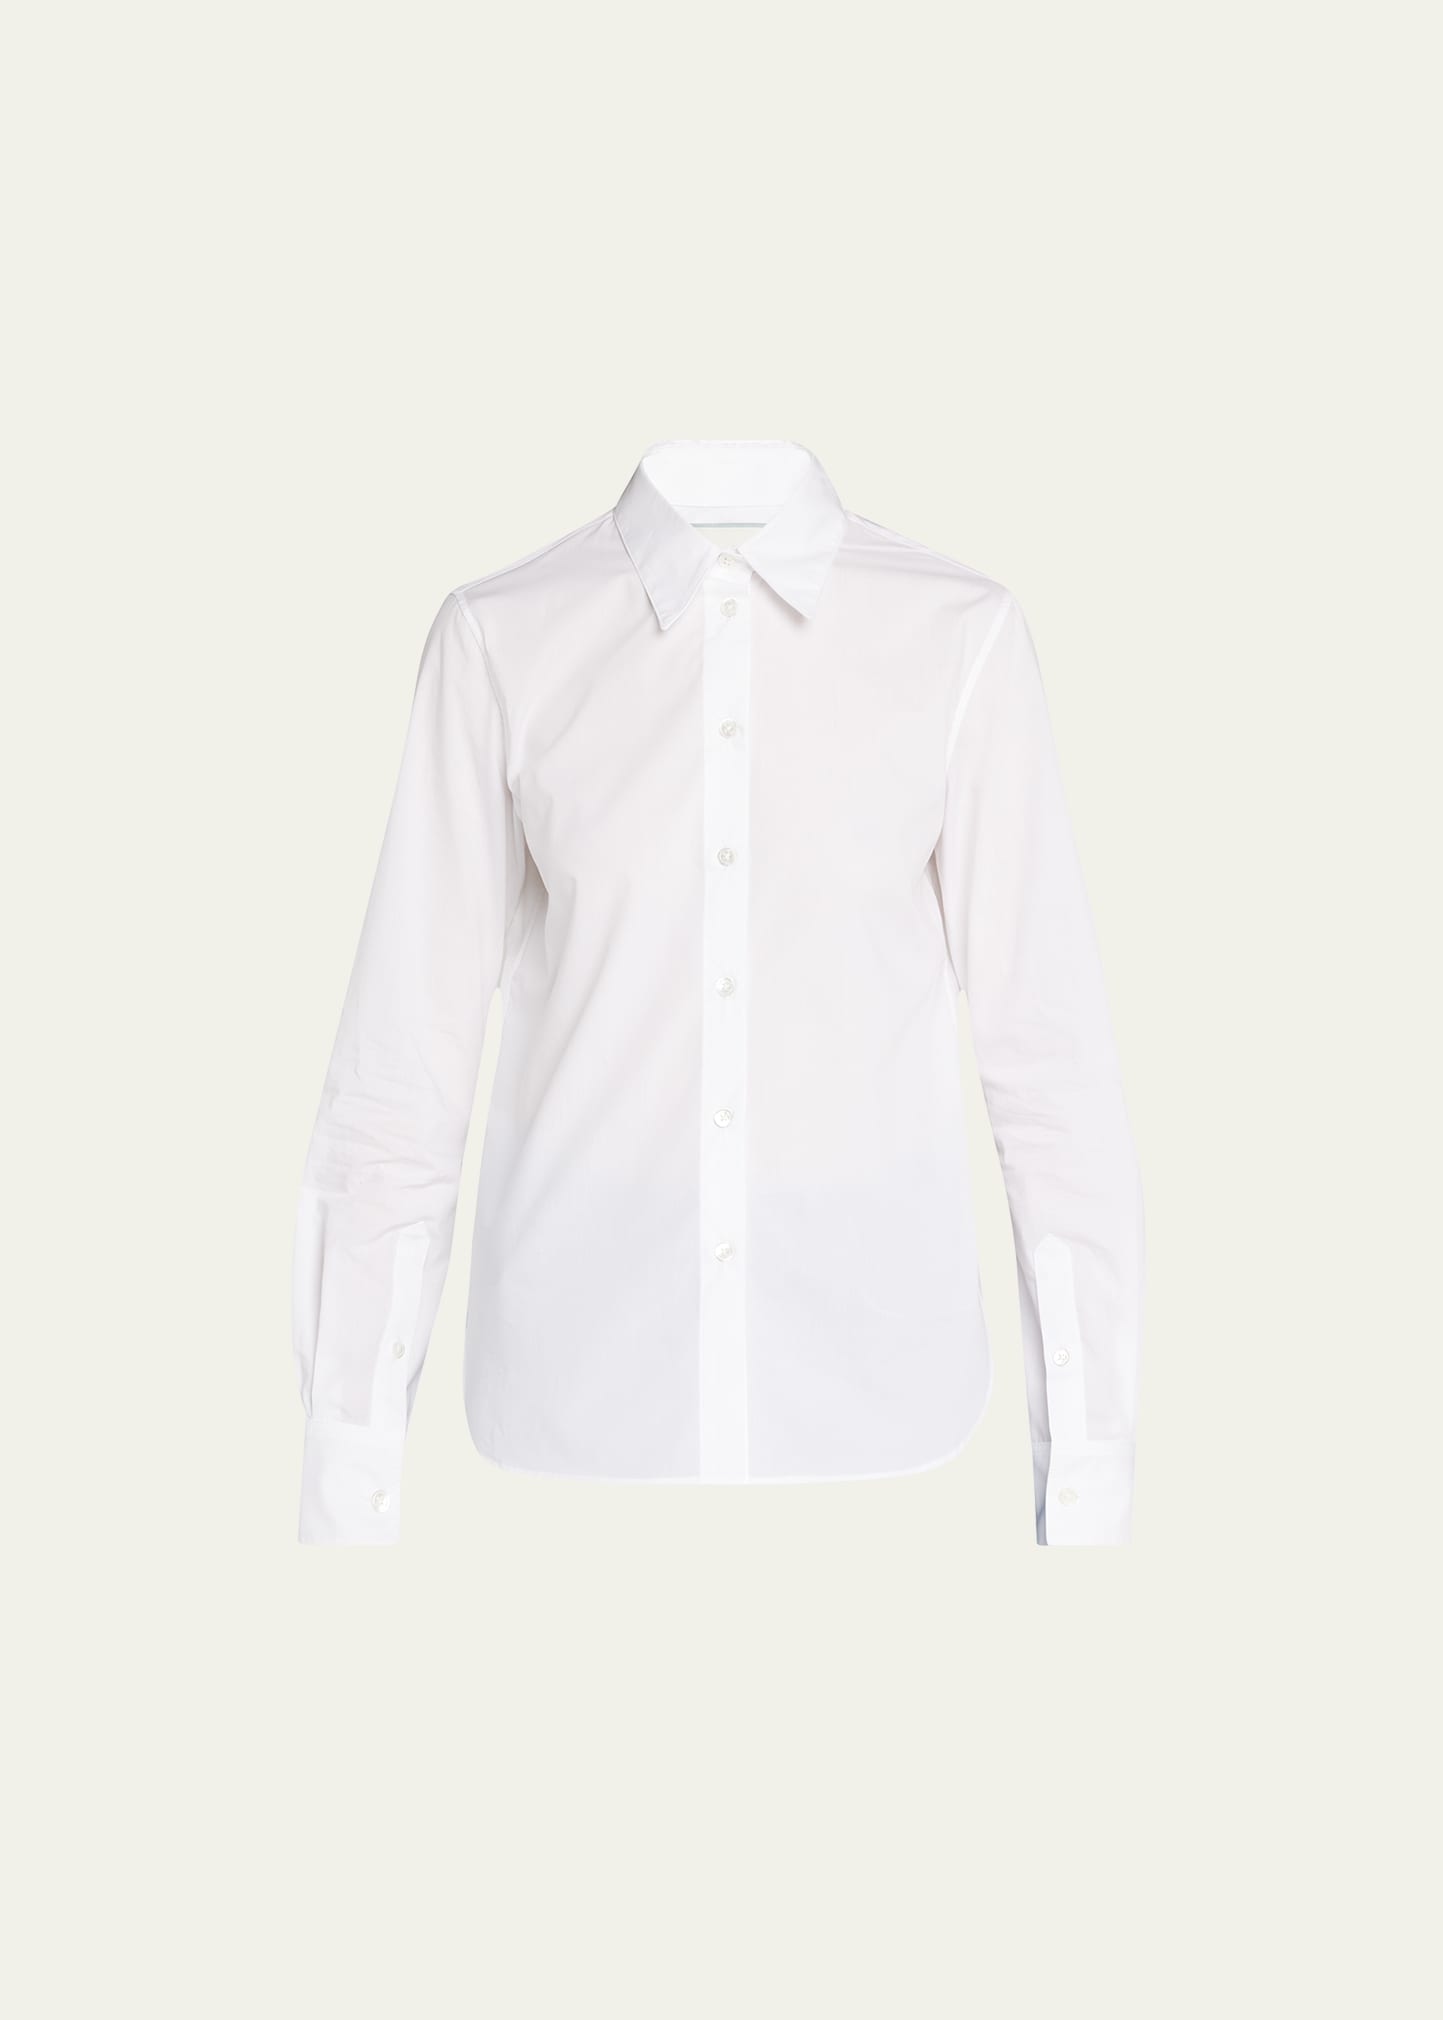 WE-AR4 FITTED BUTTON-FRONT SHIRT